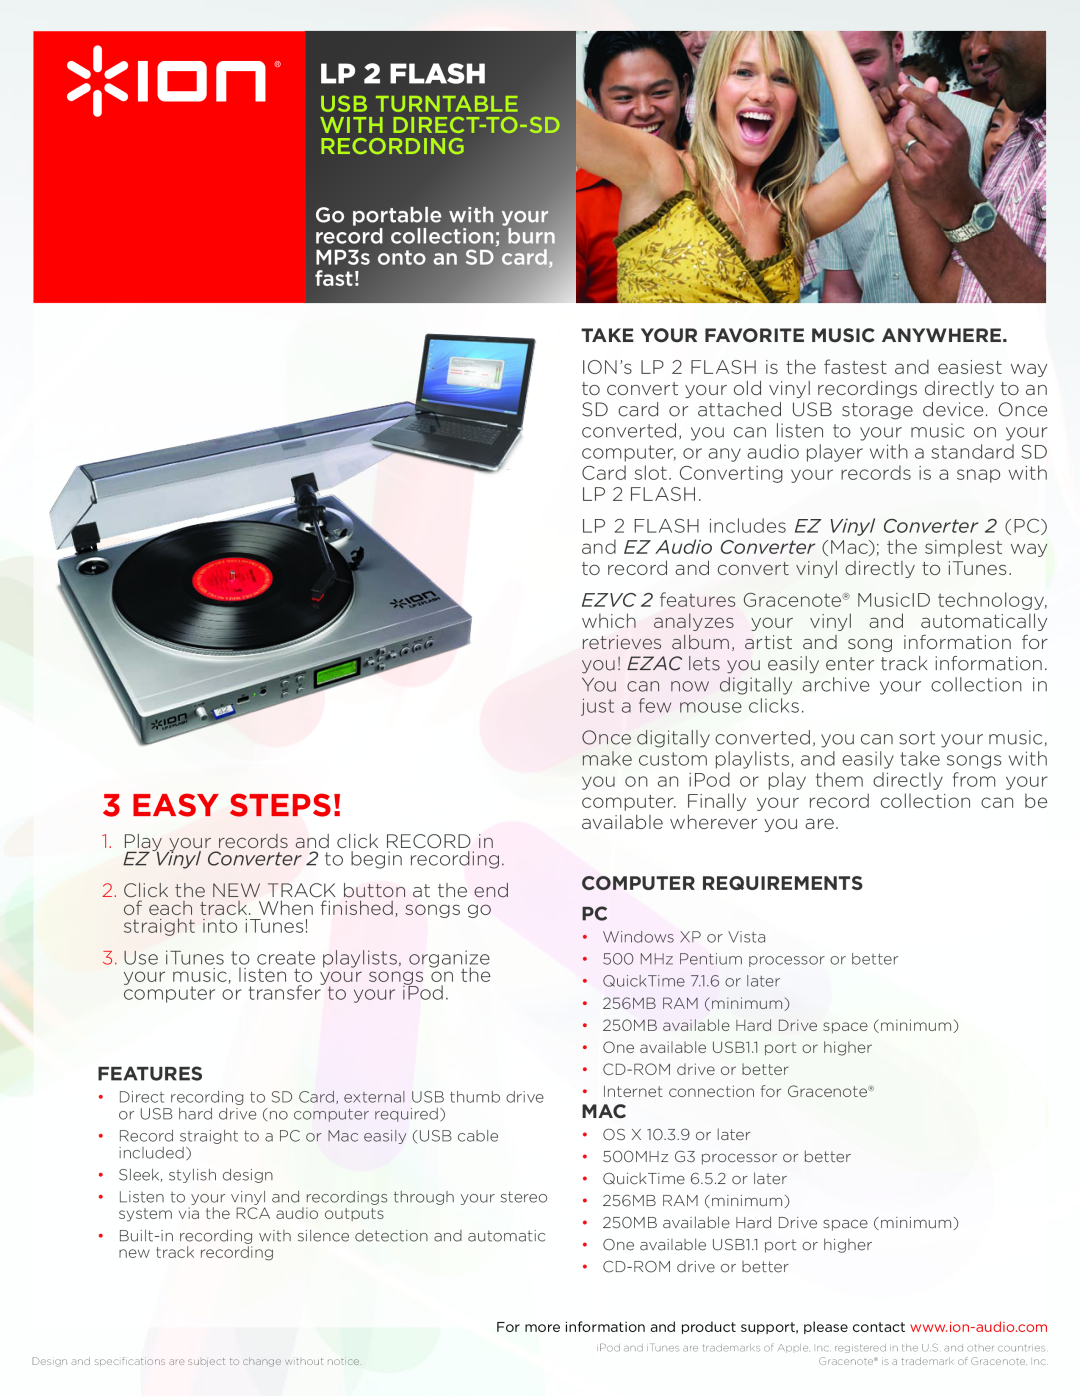 ION LP 2 FLASH specifications easy steps, usb turntable with direct-to-sdrecording, features, computer requirements PC 